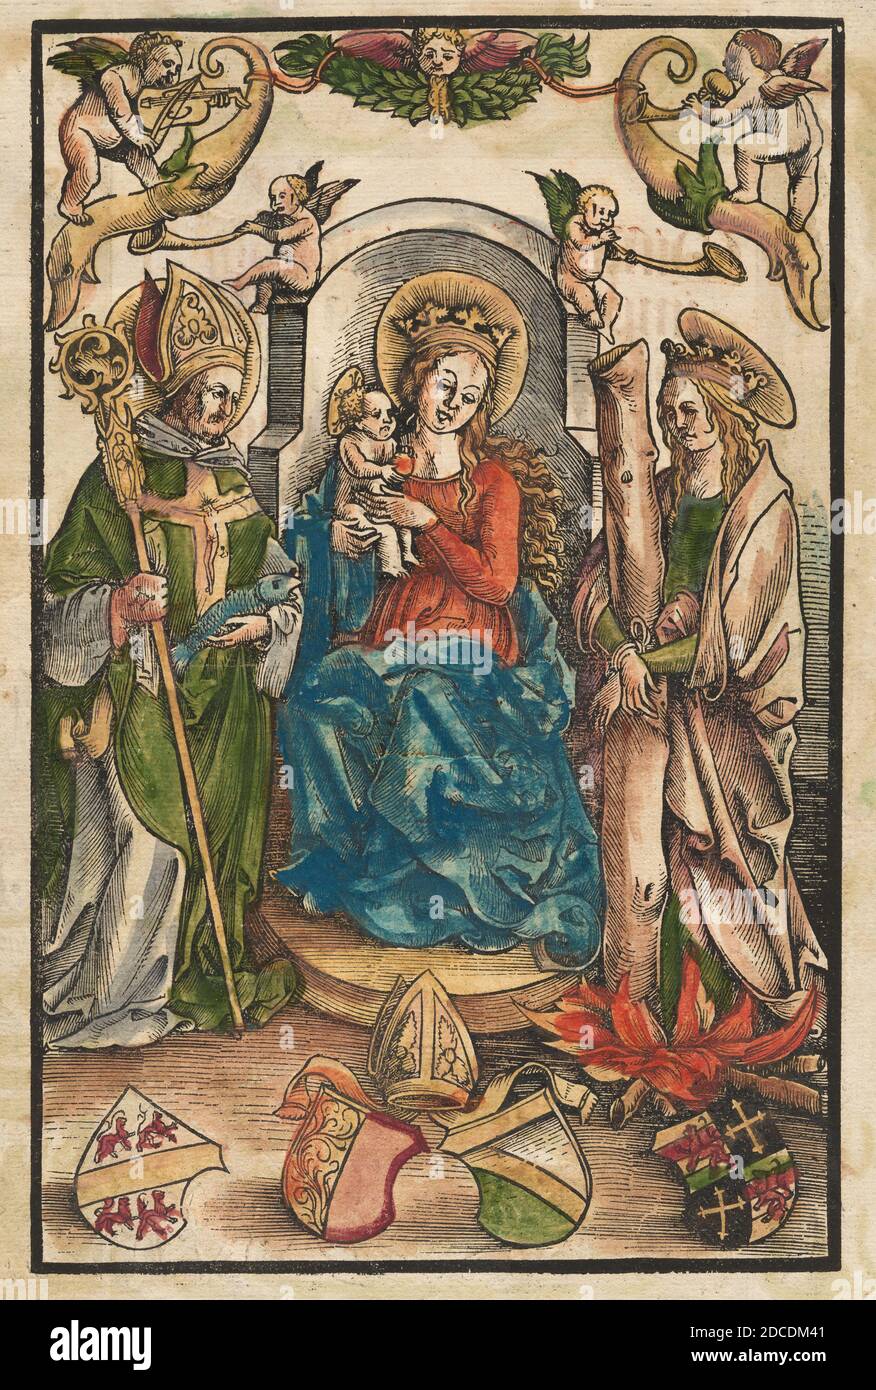 Urs Graf I, (artist), Swiss, c. 1485 - 1527/1529, The Madonna with Saint Ulrich and Saint Afra, c. 1511, hand-colored woodcut, image: 26 x 16.6 cm (10 1/4 x 6 9/16 in.), sheet: 32.3 x 22 cm (12 11/16 x 8 11/16 in Stock Photo